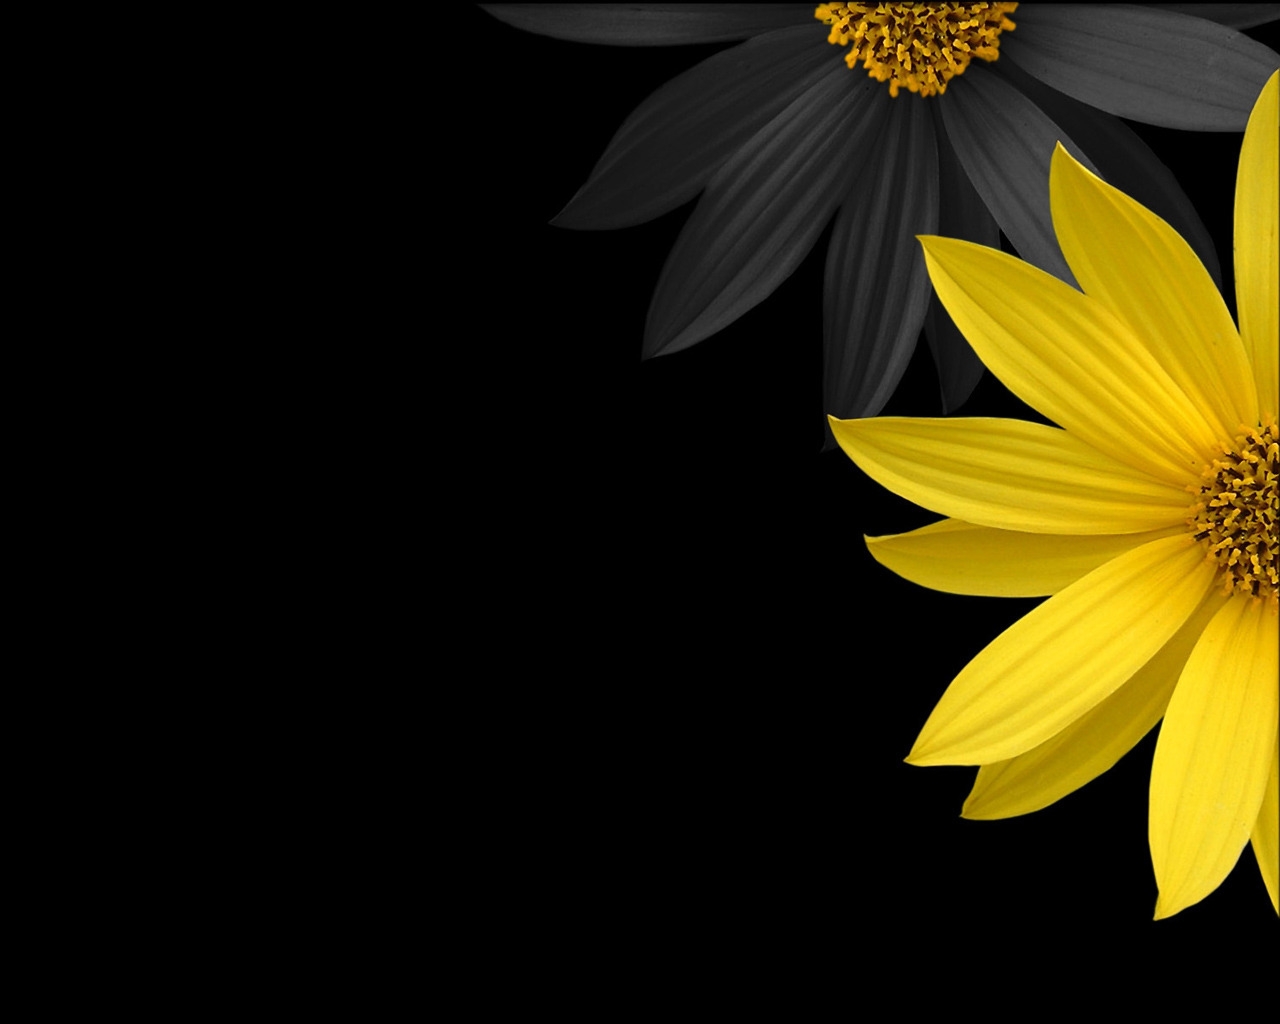 Simple Flower for 1280 x 1024 resolution